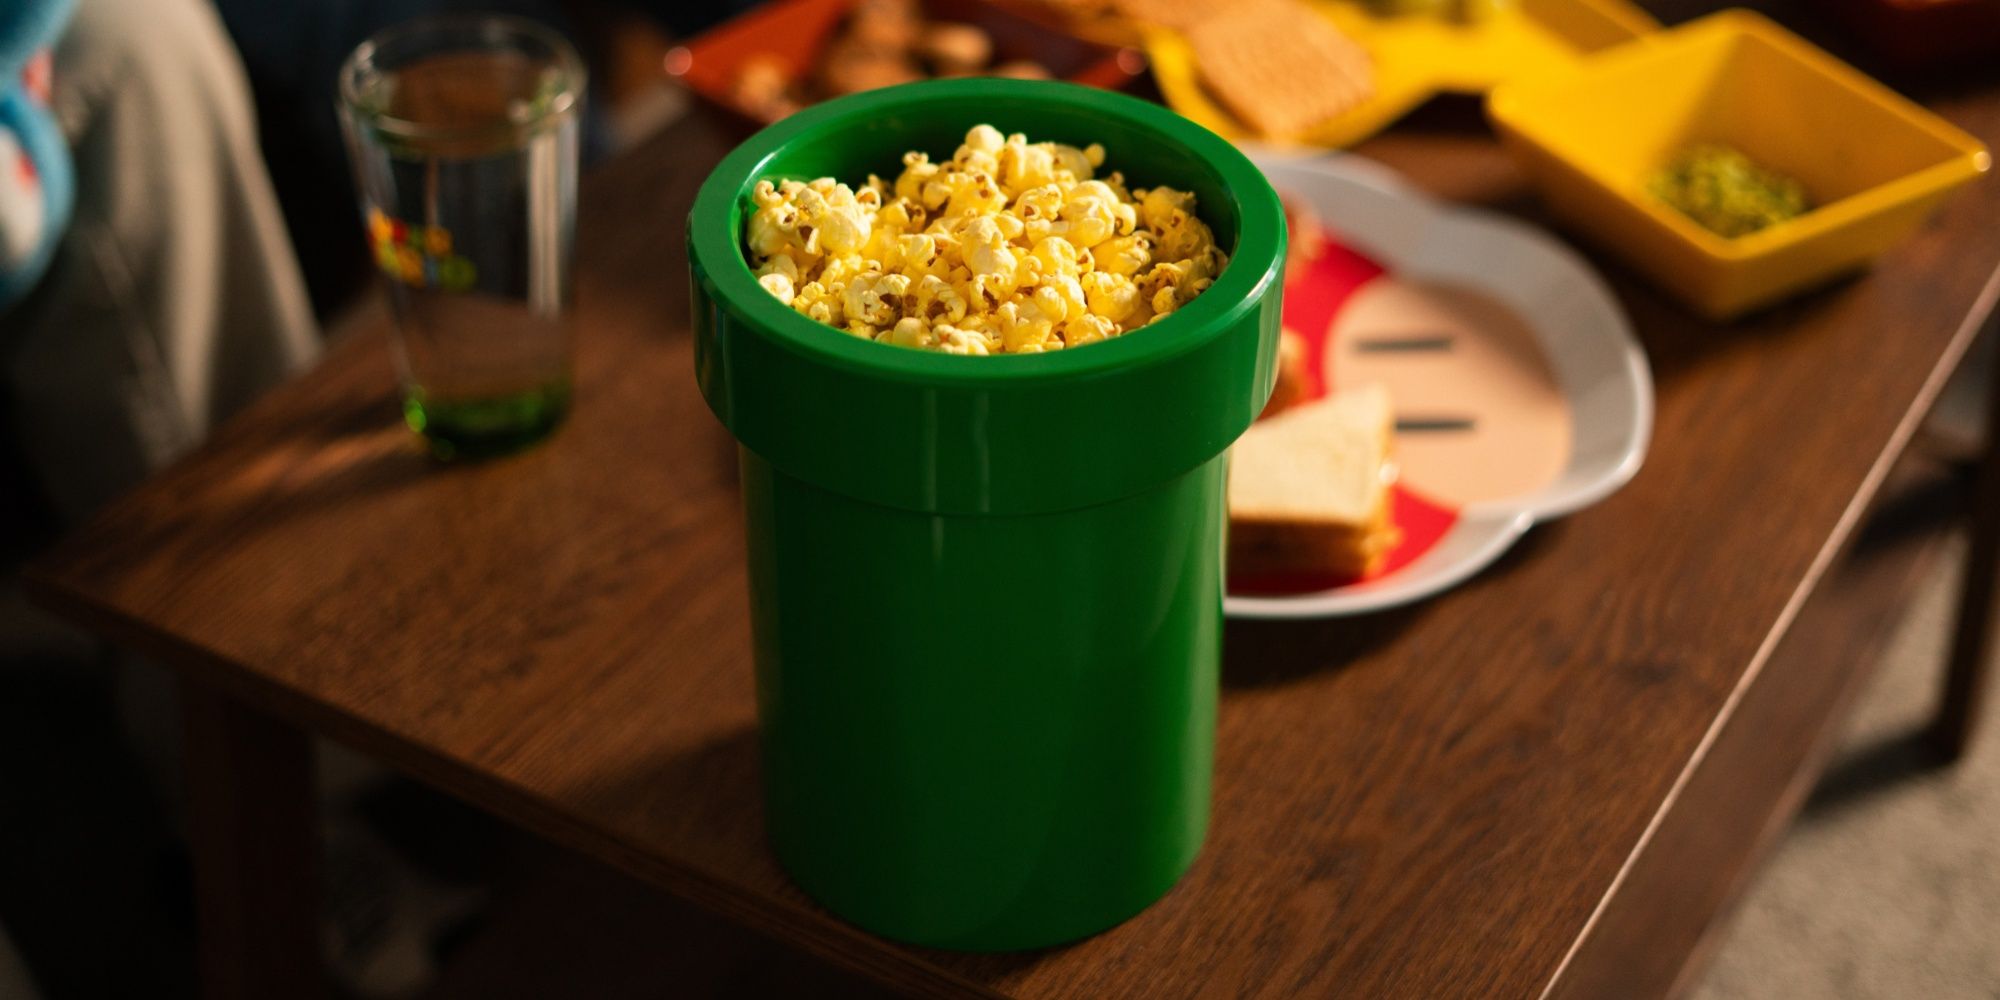 mario warp pipe snack bowl filled with popcorn